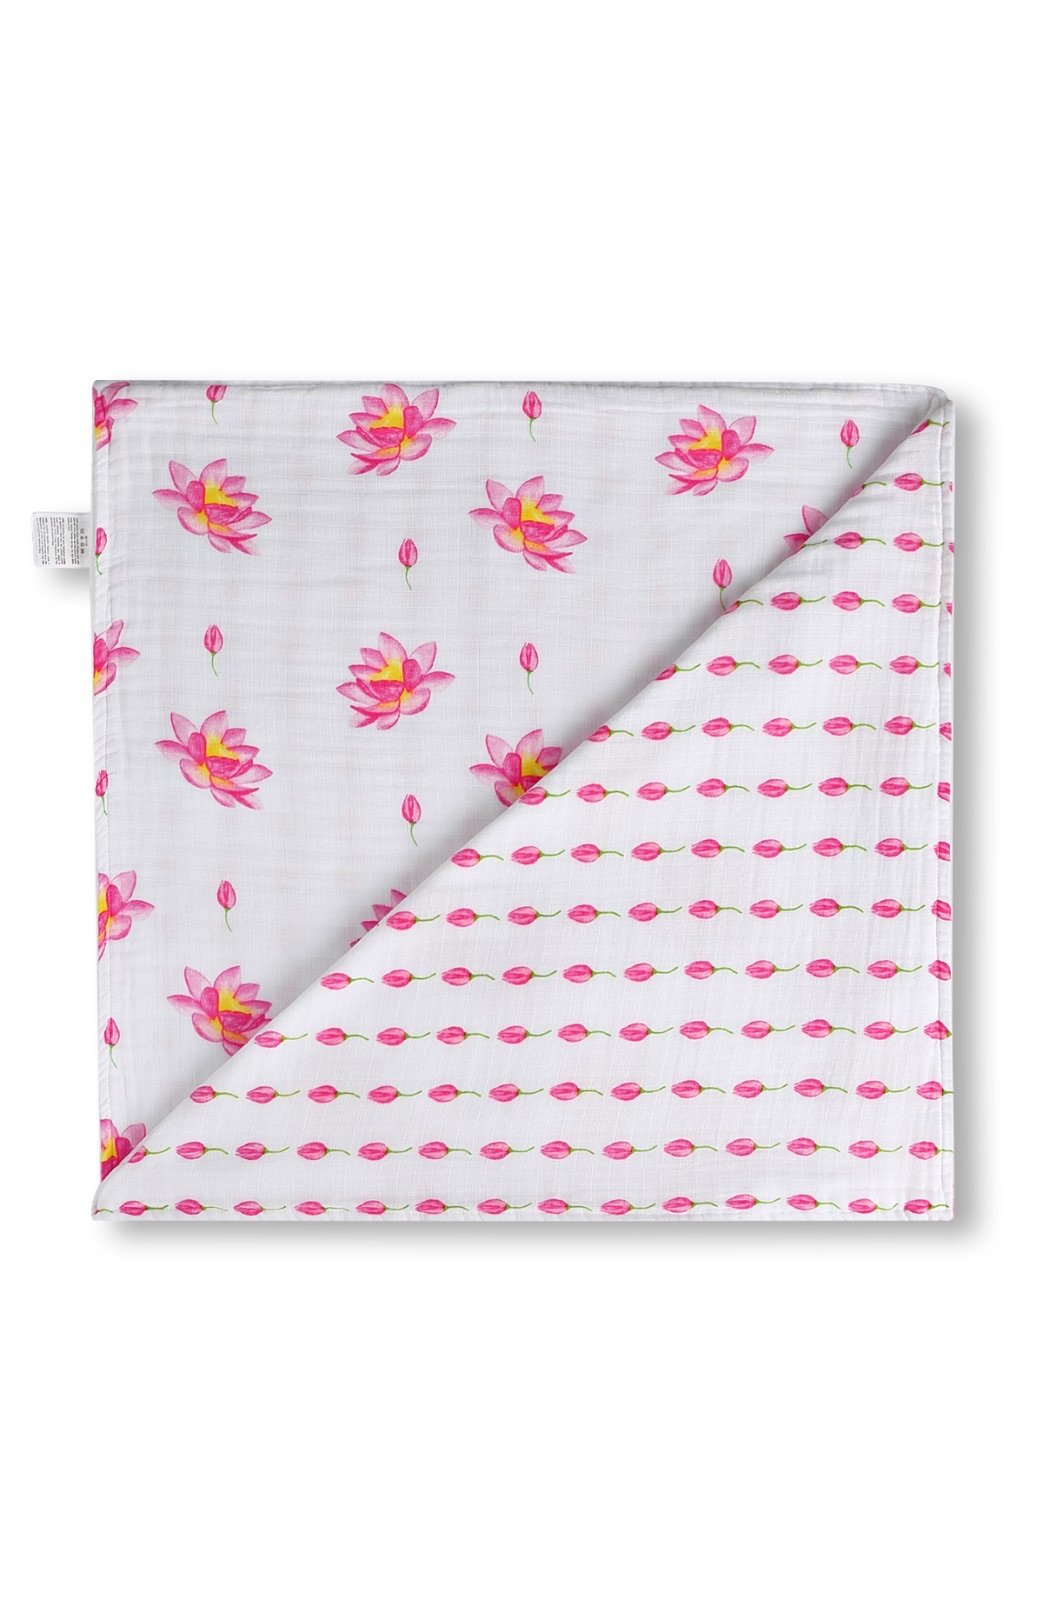 Lotus Organic Cotton Snug Blanket for Home or On the Go